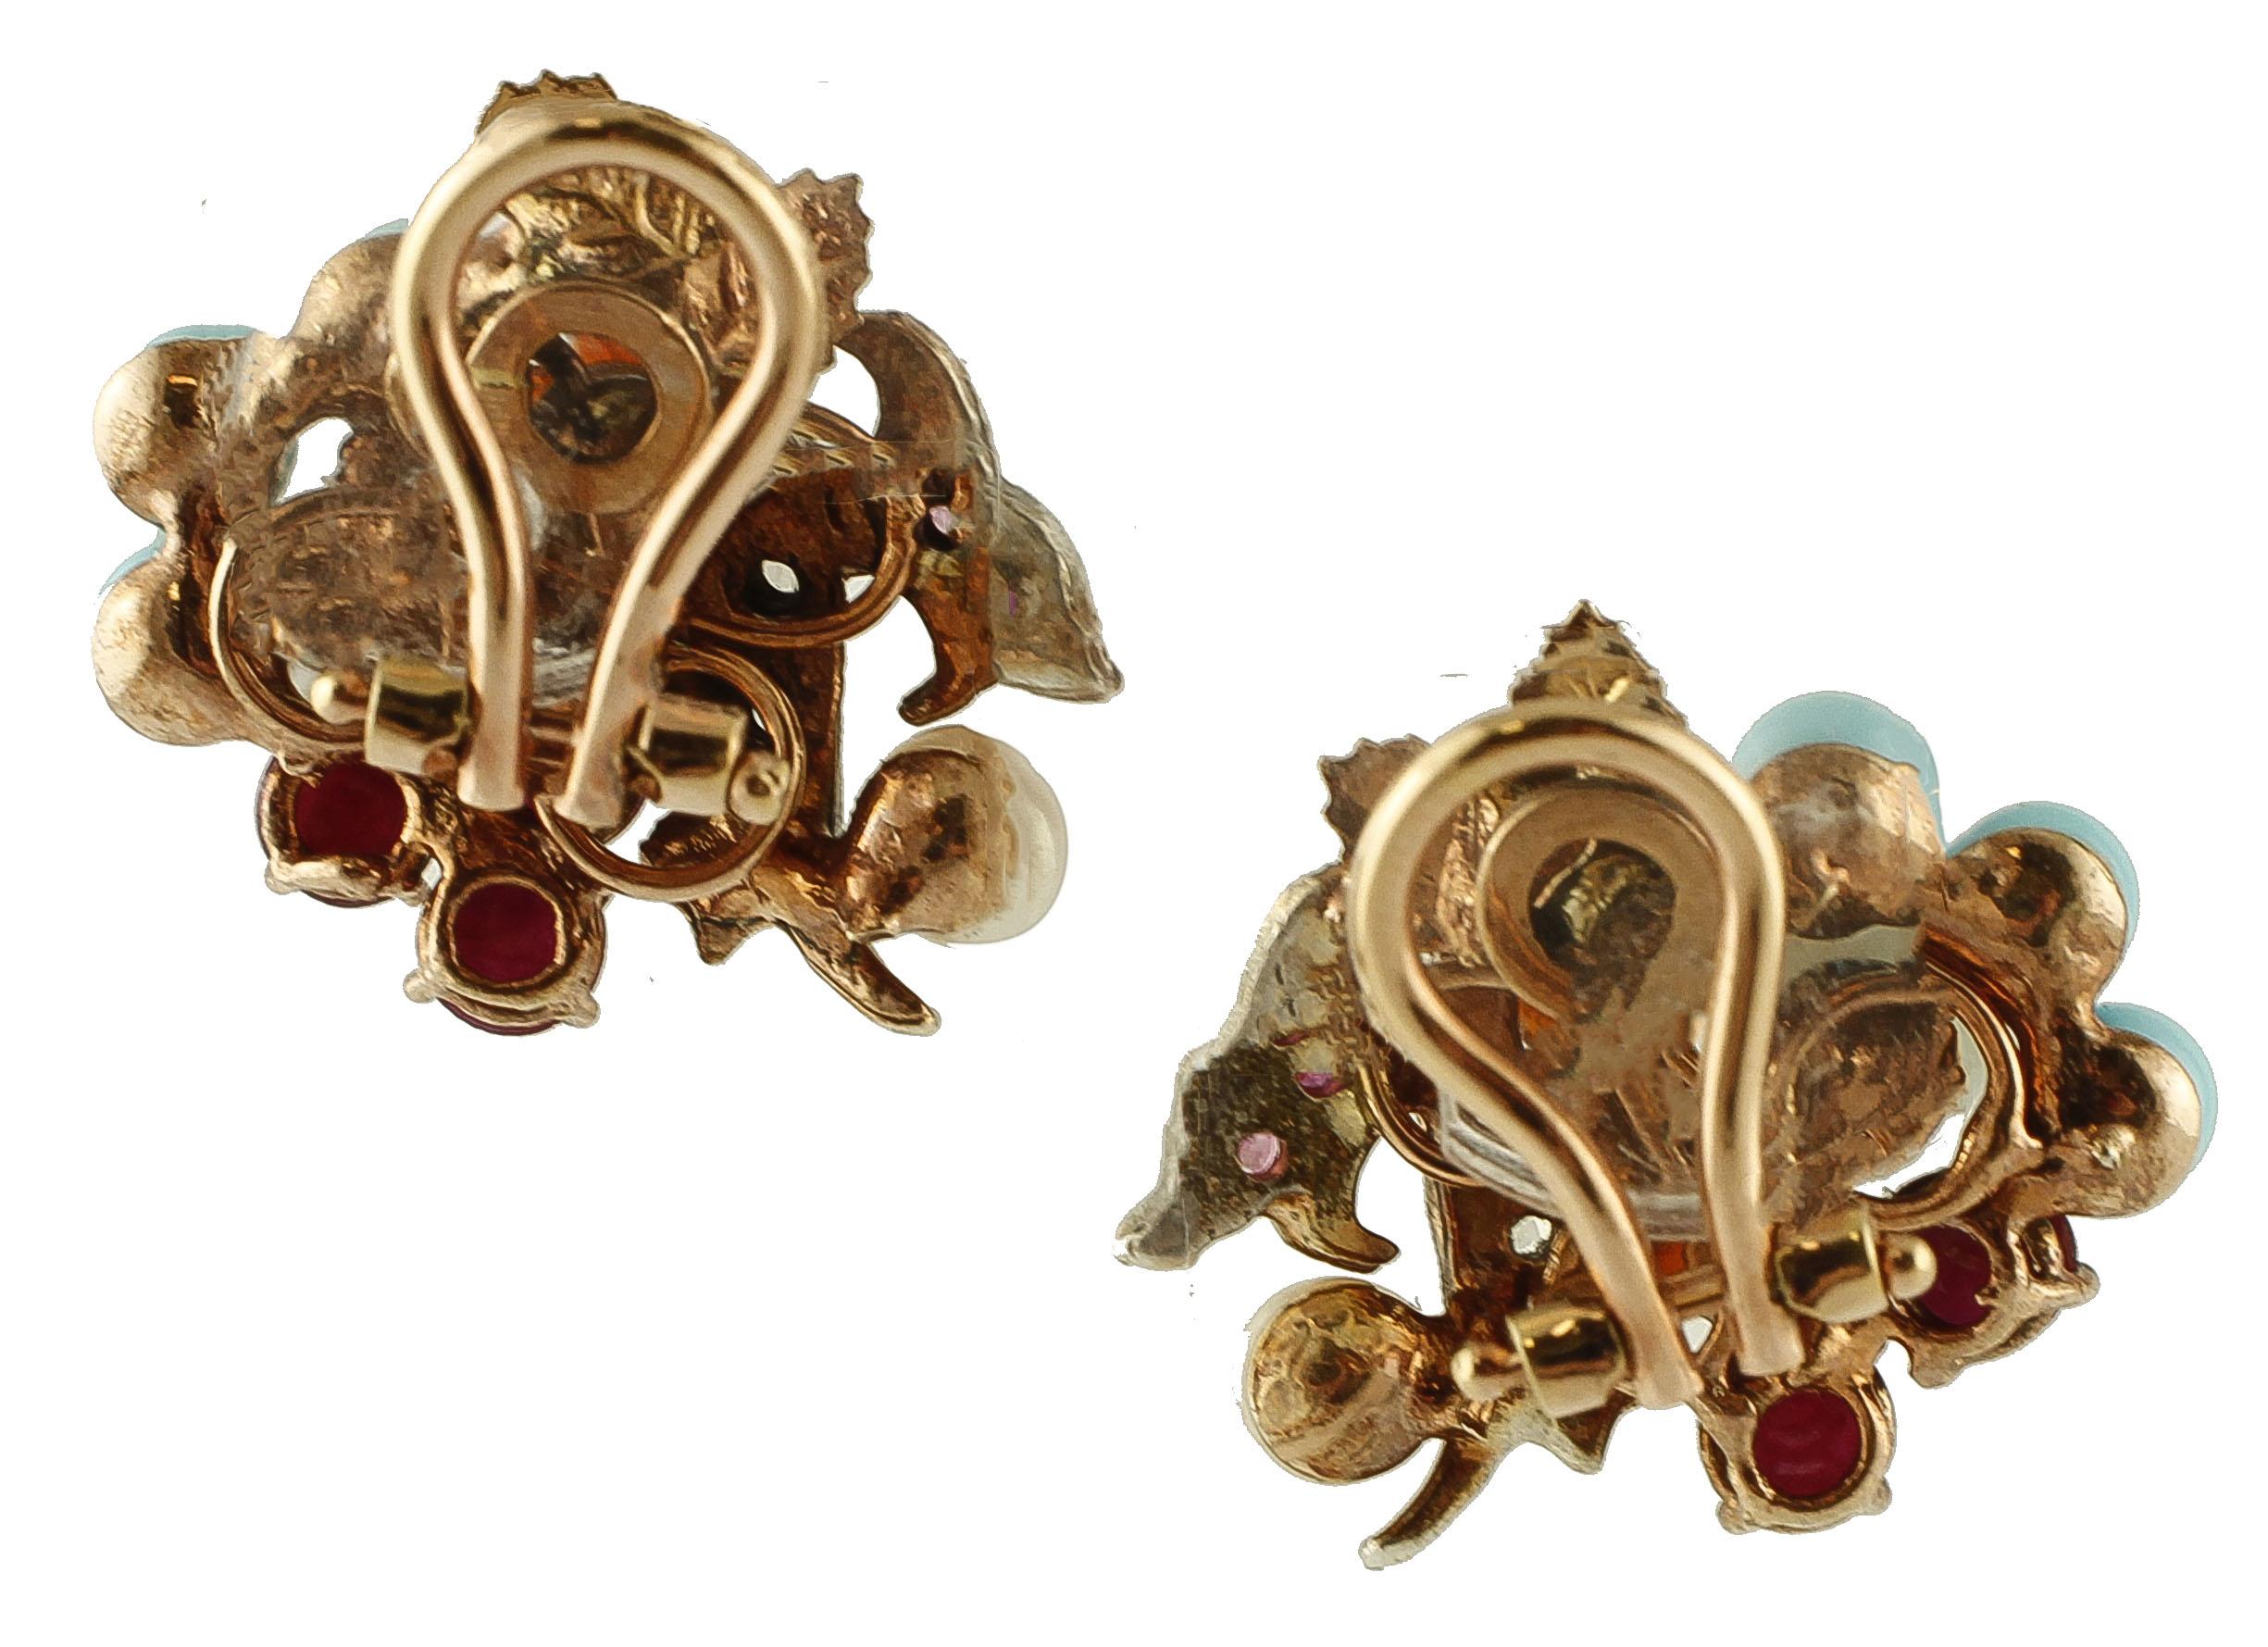 Beautiful pair of clip-on earrings in 9k rose gold and silver structure with flowery motif, realized with little flowers of mother-of-pearl and carnelian, plus adornments of turquoises, rubies, little pearls and silver leaves studded with diamonds